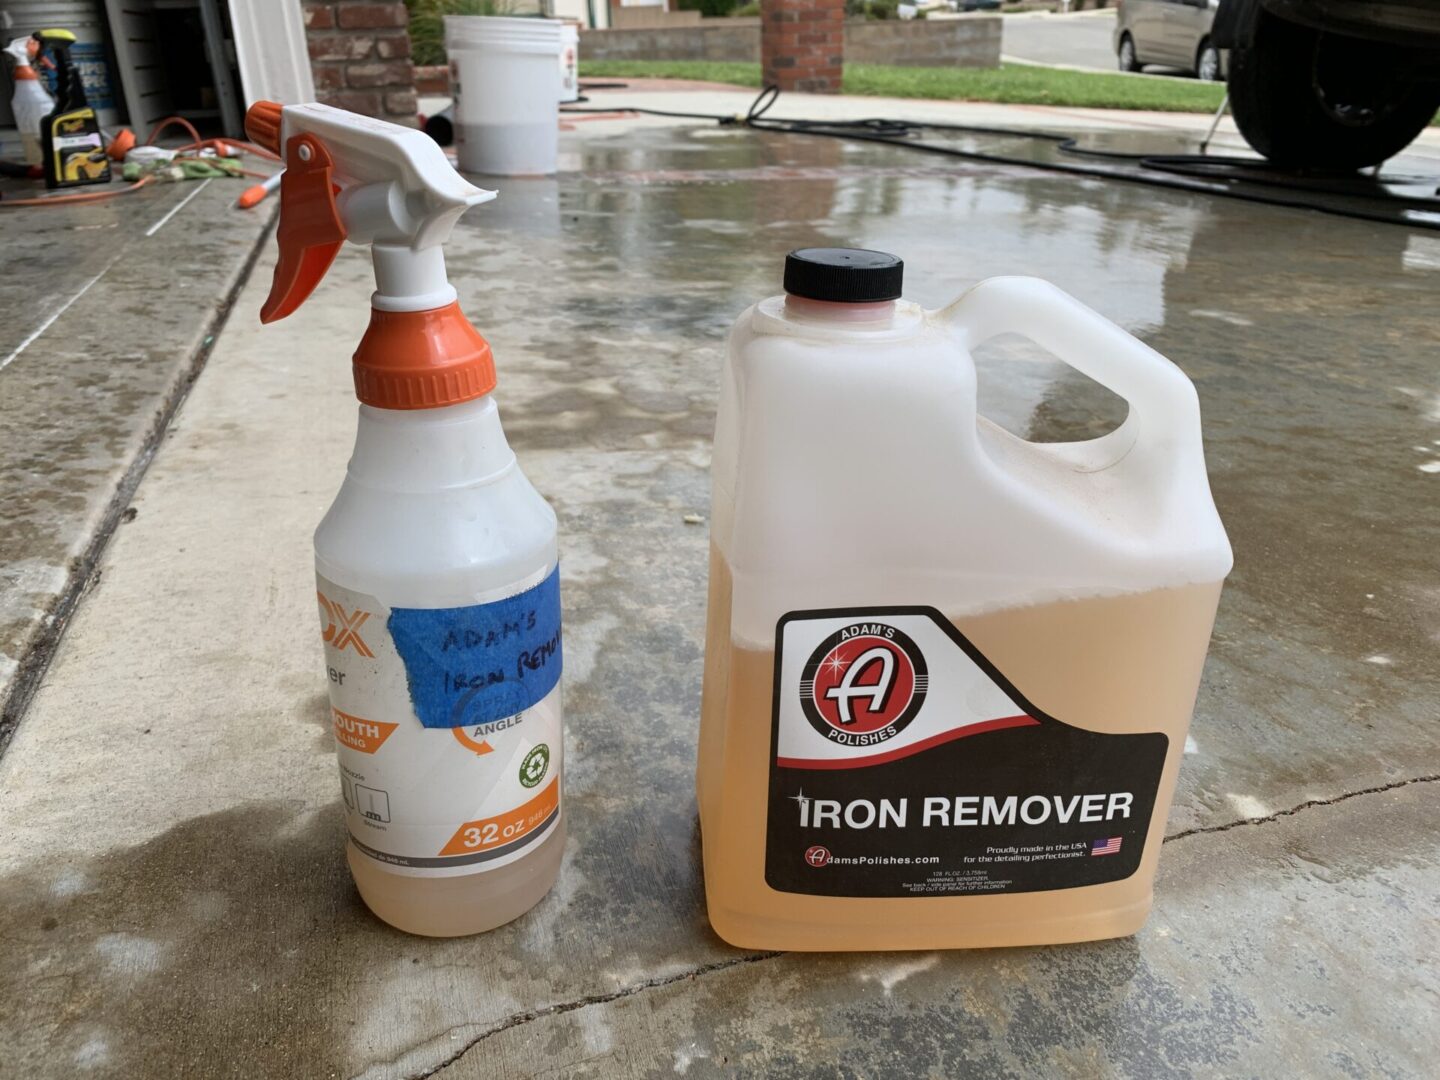 Adam's Polishes - Iron Remover is the easiest way to remove those stubborn  orange specs on your paint. Decontaminate your paint and start fresh this  spring! Use code IRON15 at checkout for